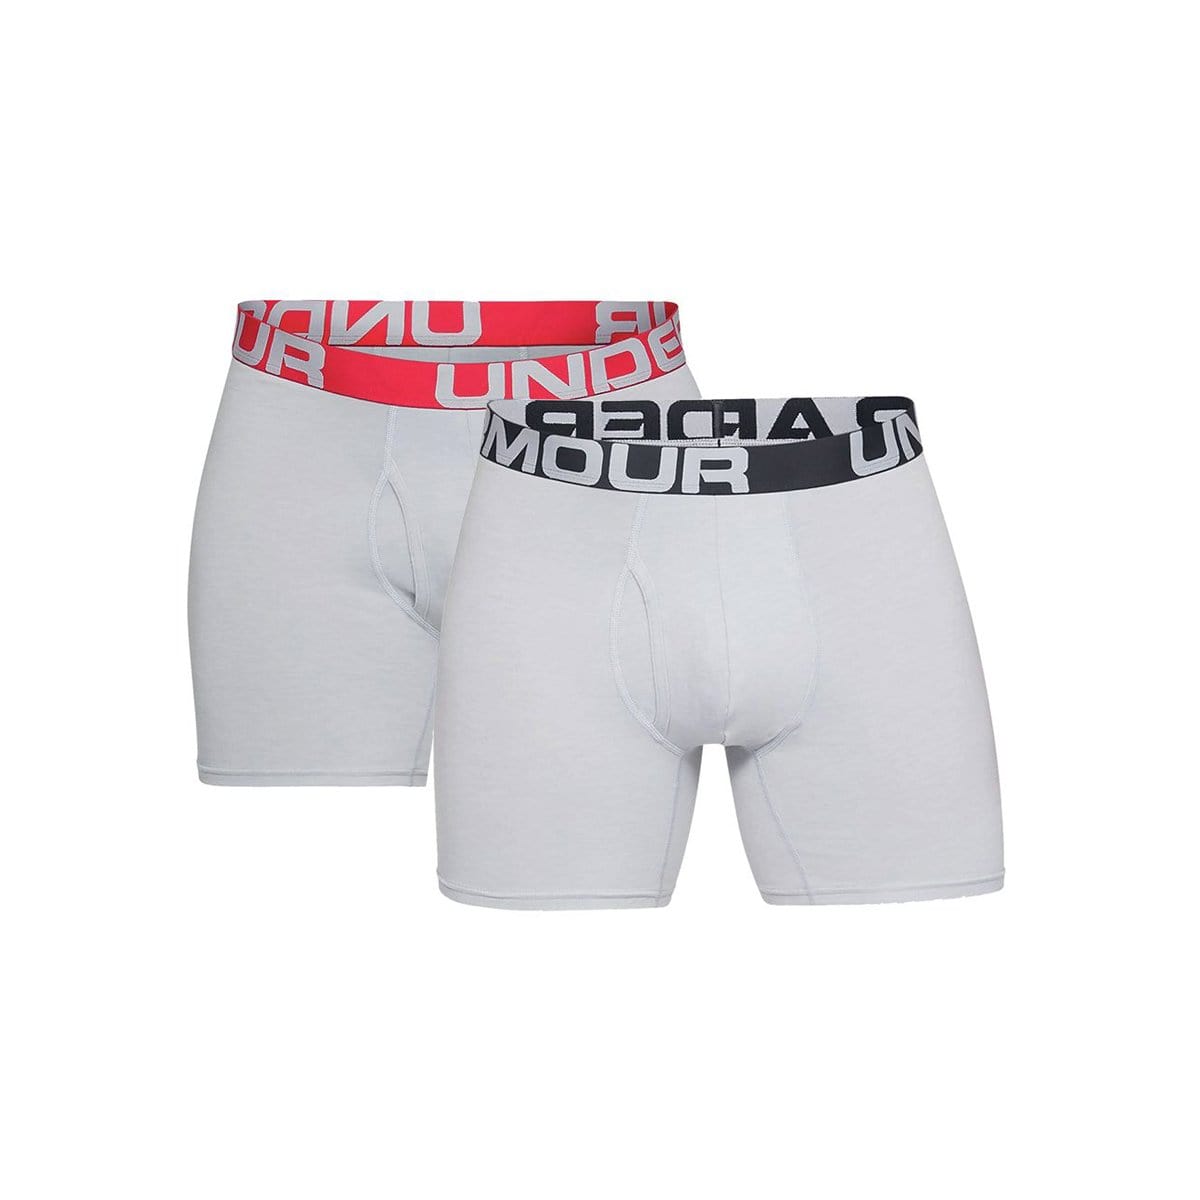 UNDER ARMOUR - Charged Cotton Boxer Brief - 3 Pack – Beyond